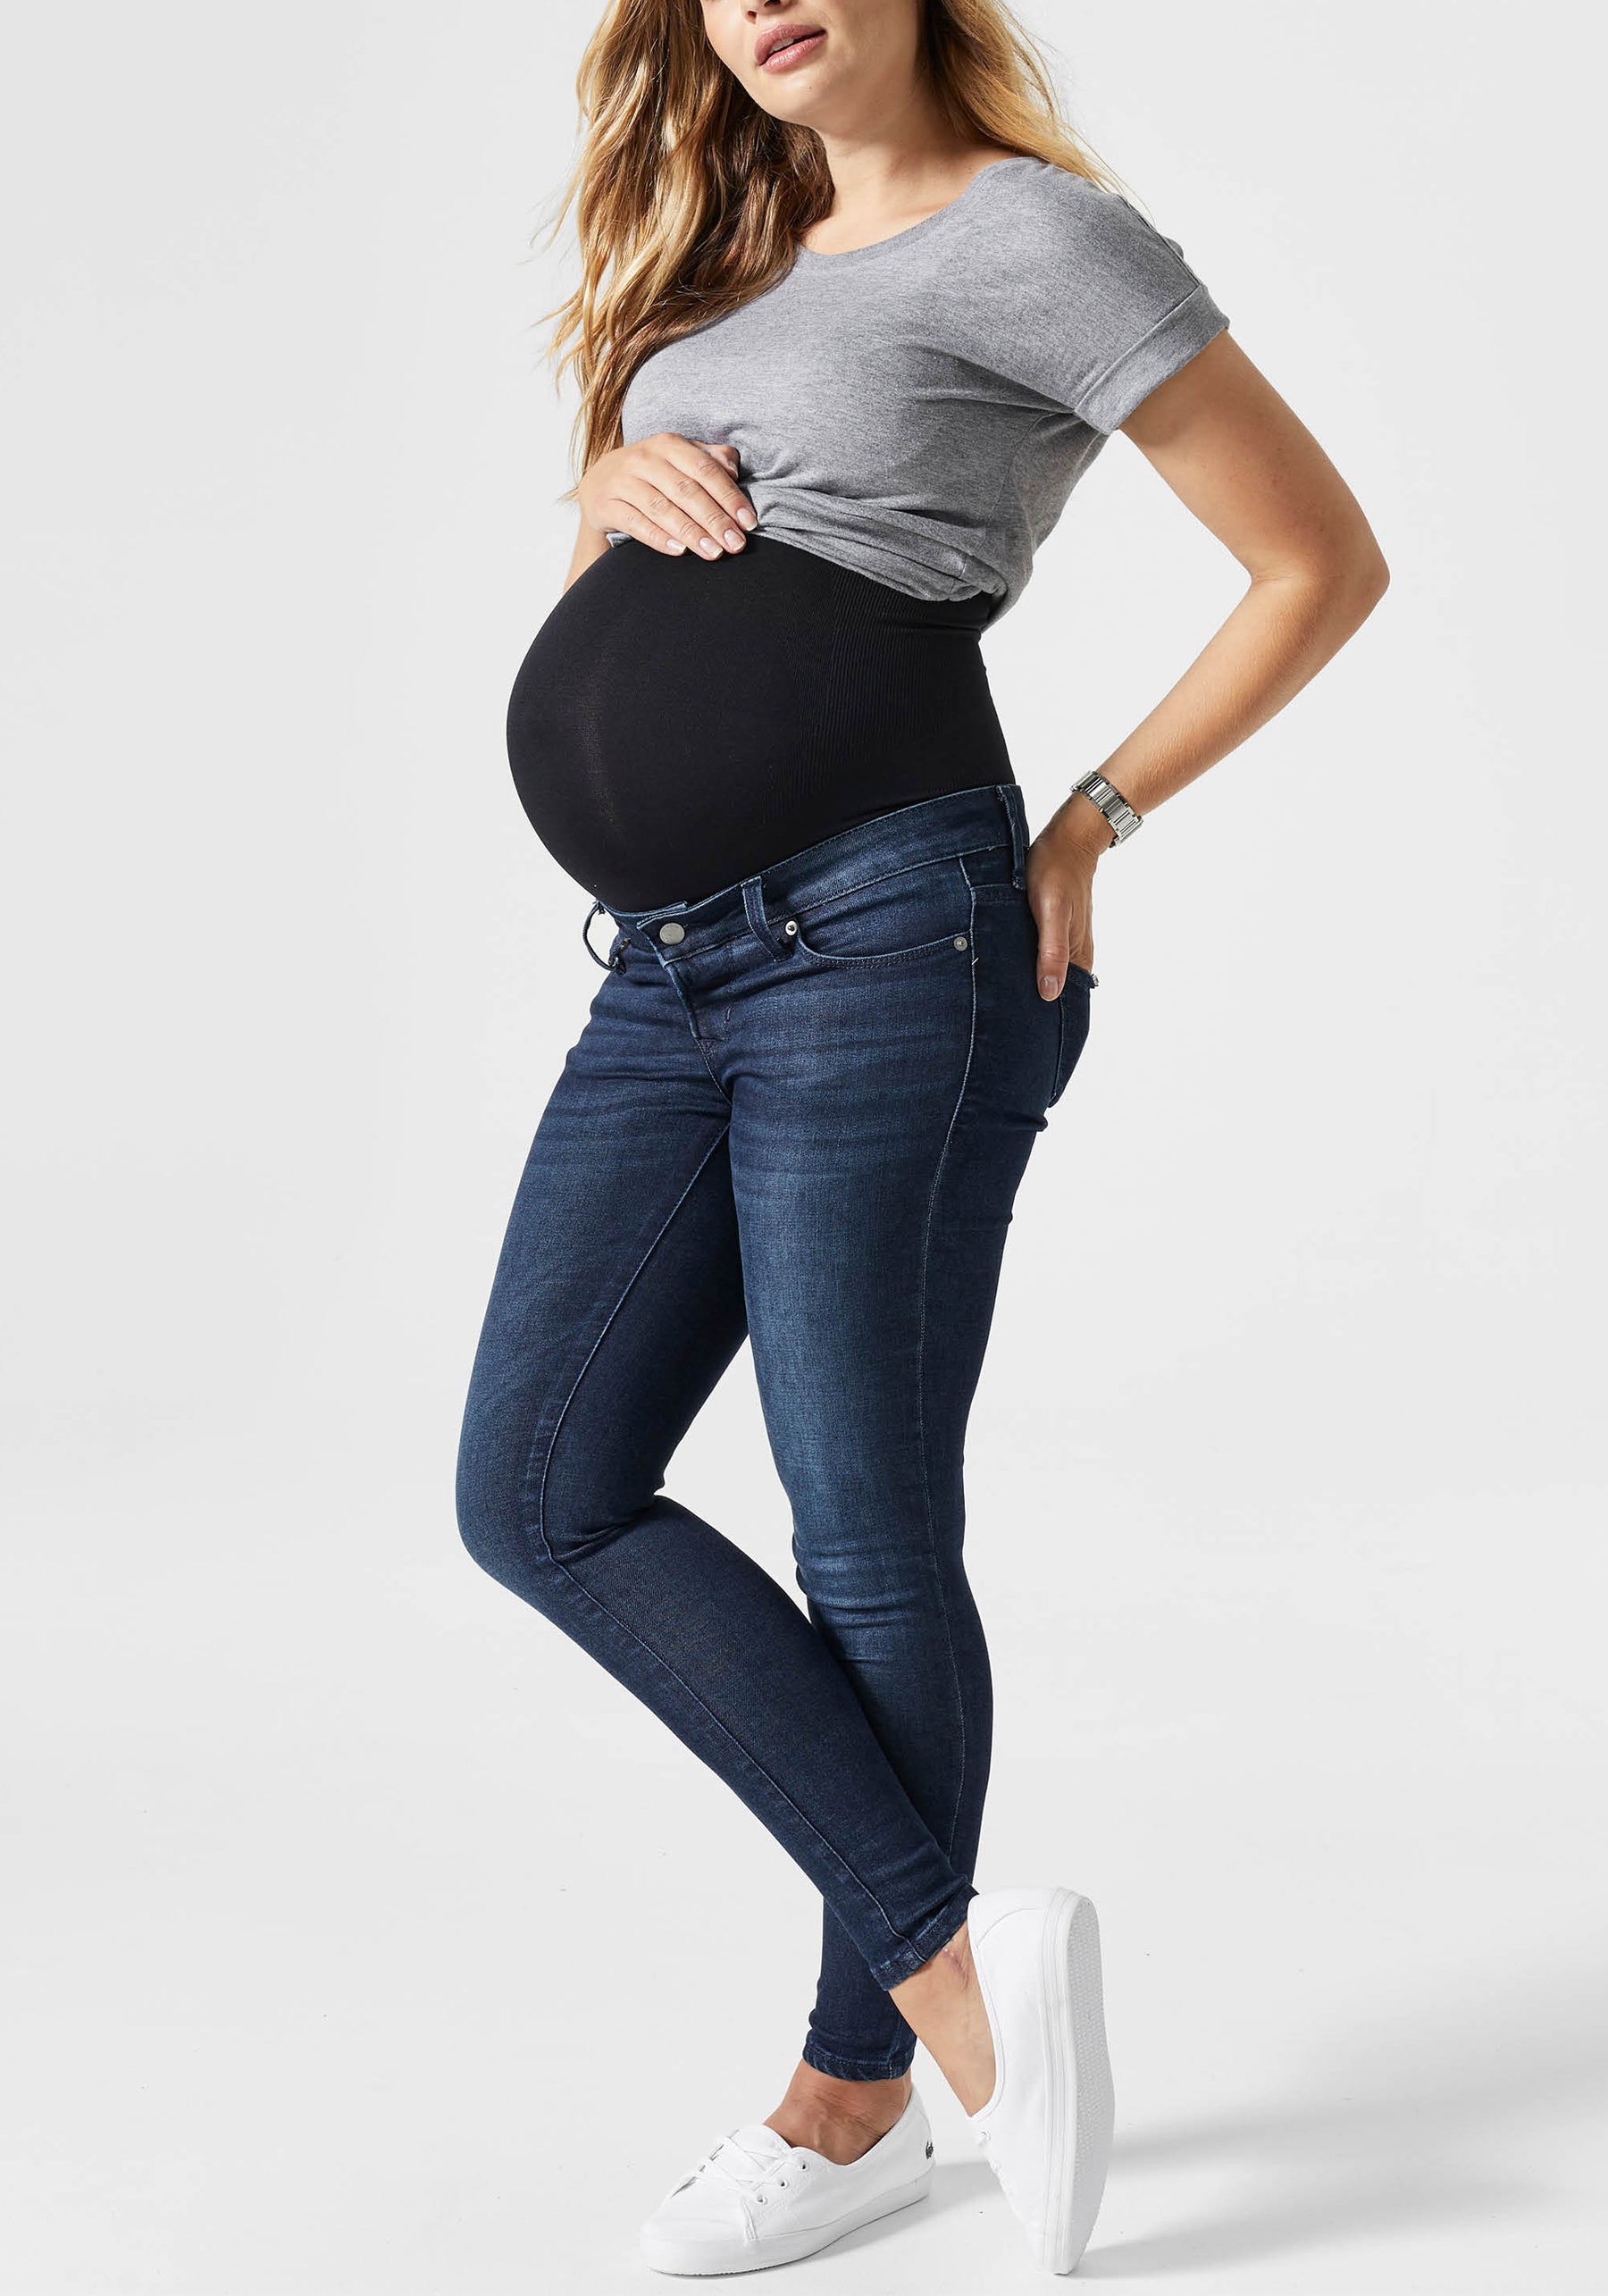 BLANQI® Denim Maternity Belly Support Skinny Jeans